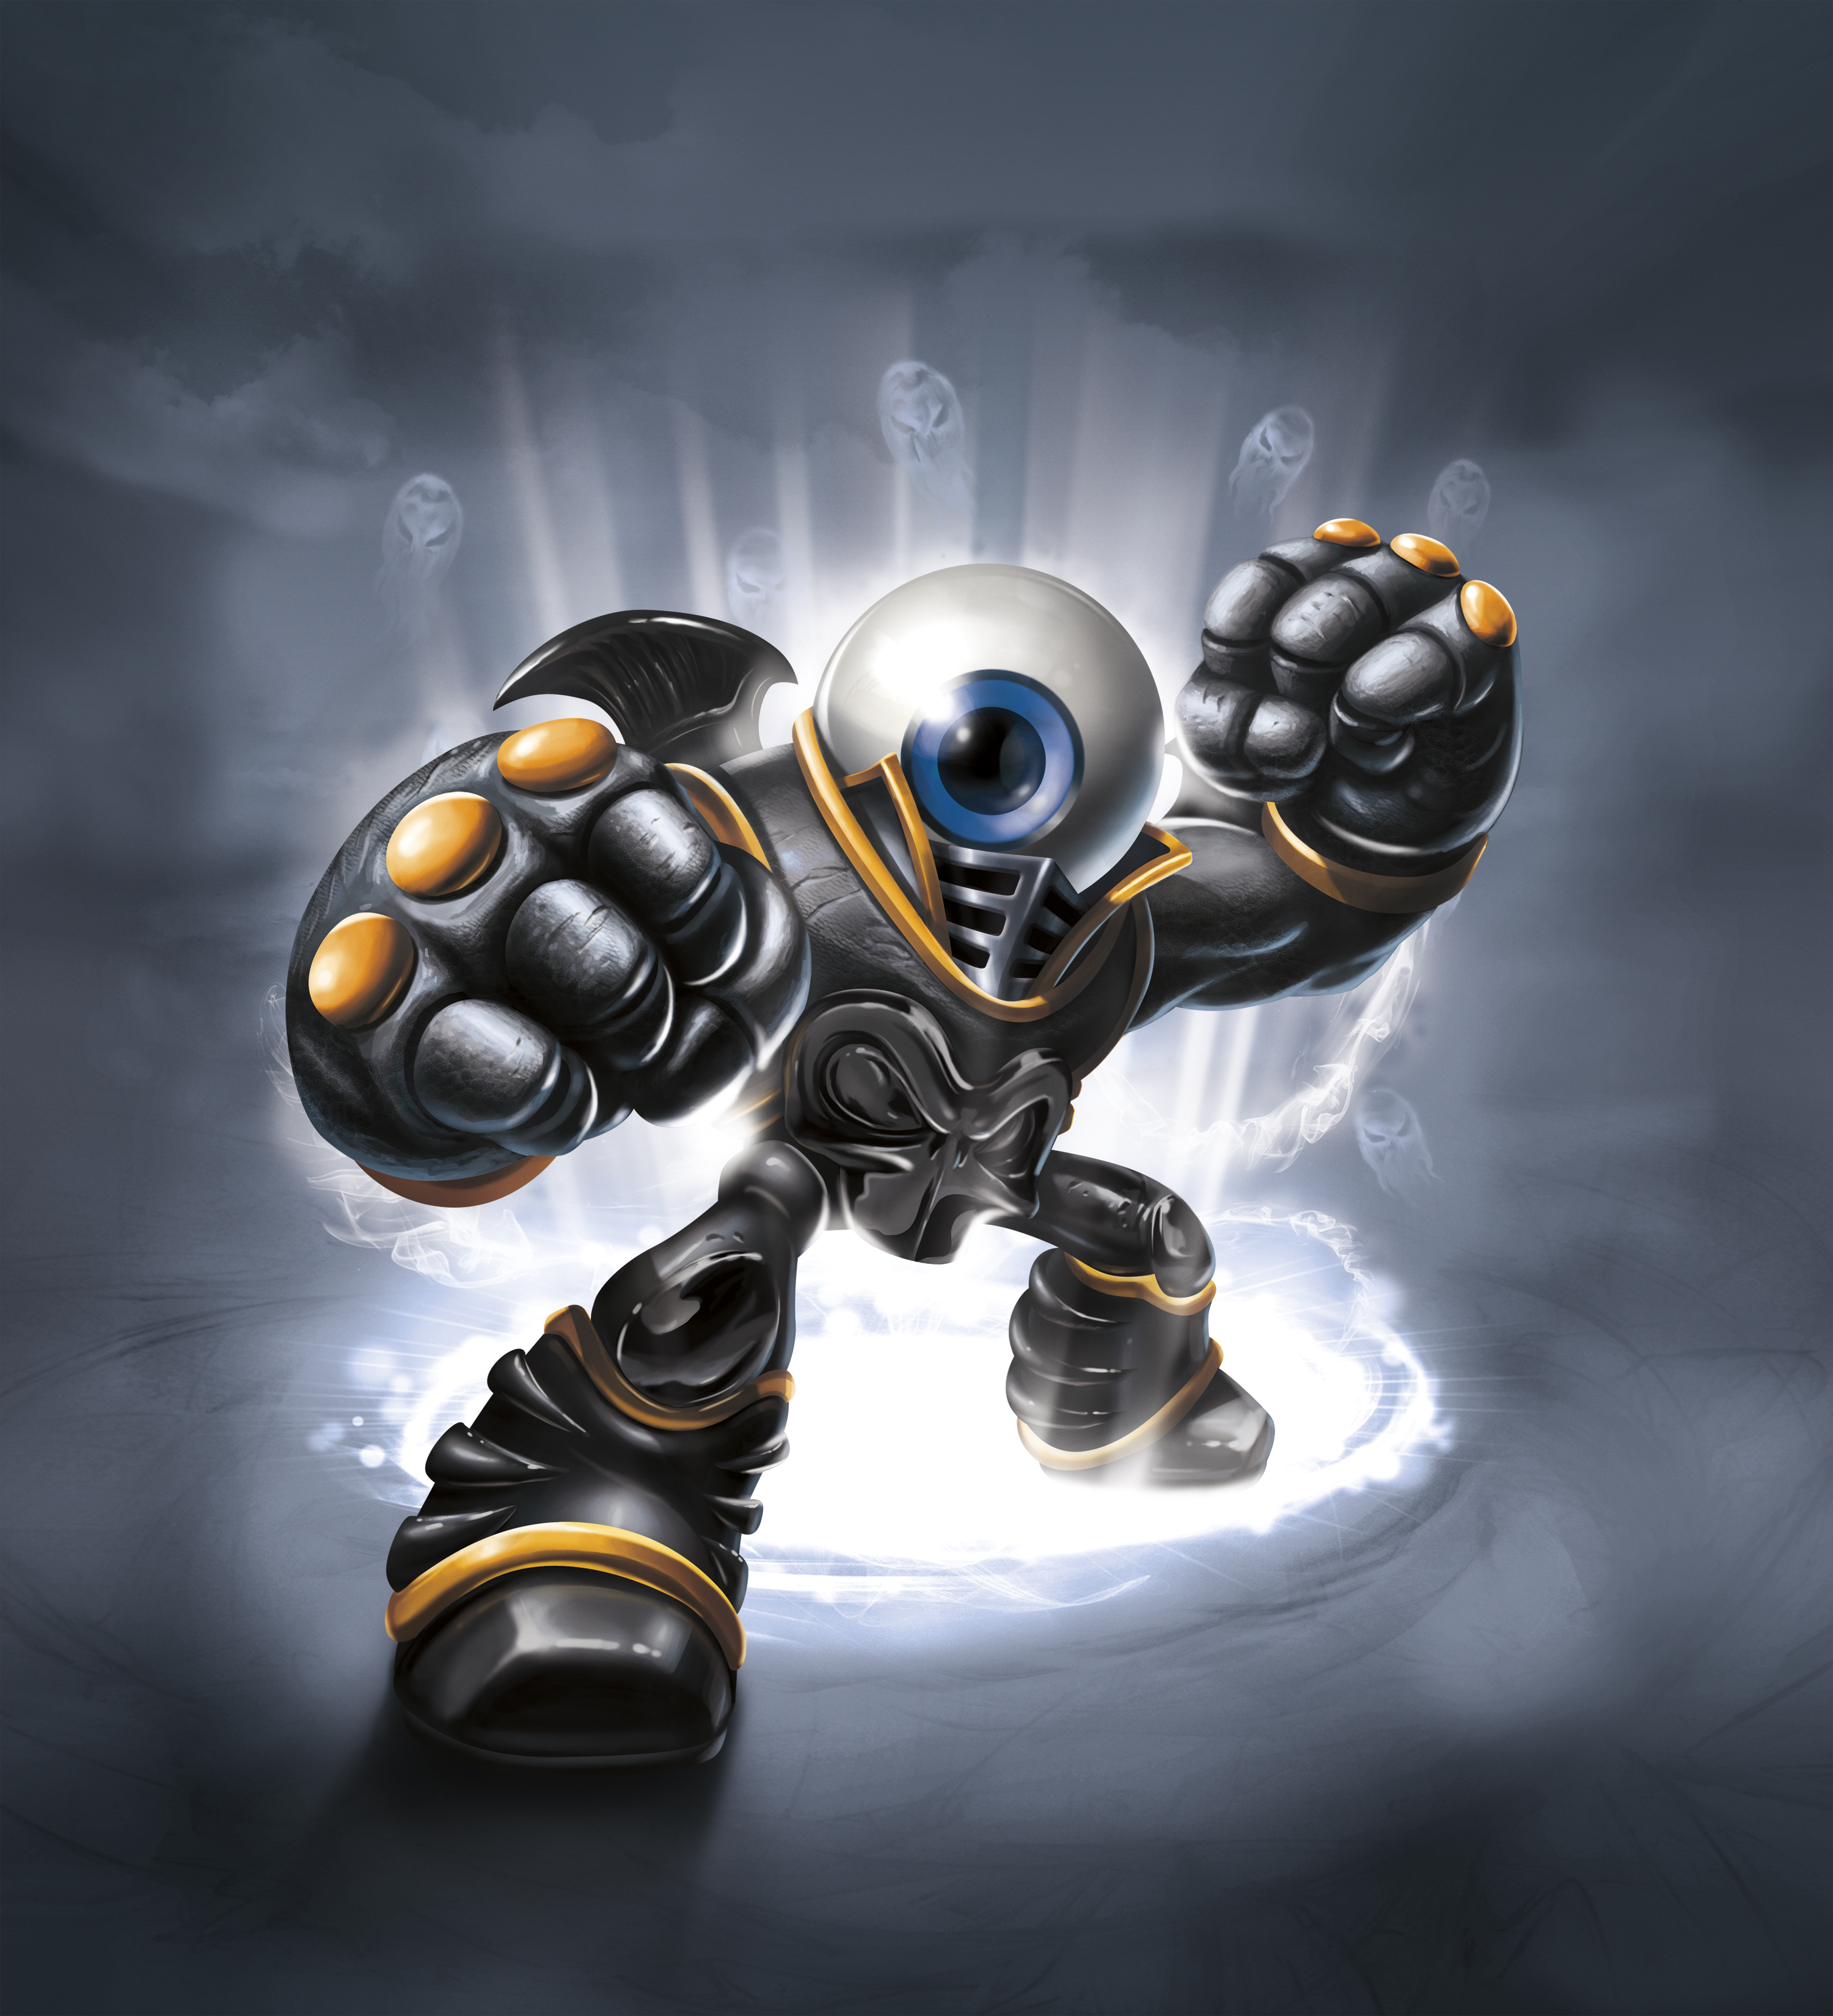 Two new Giants join Activision’s Skylanders.